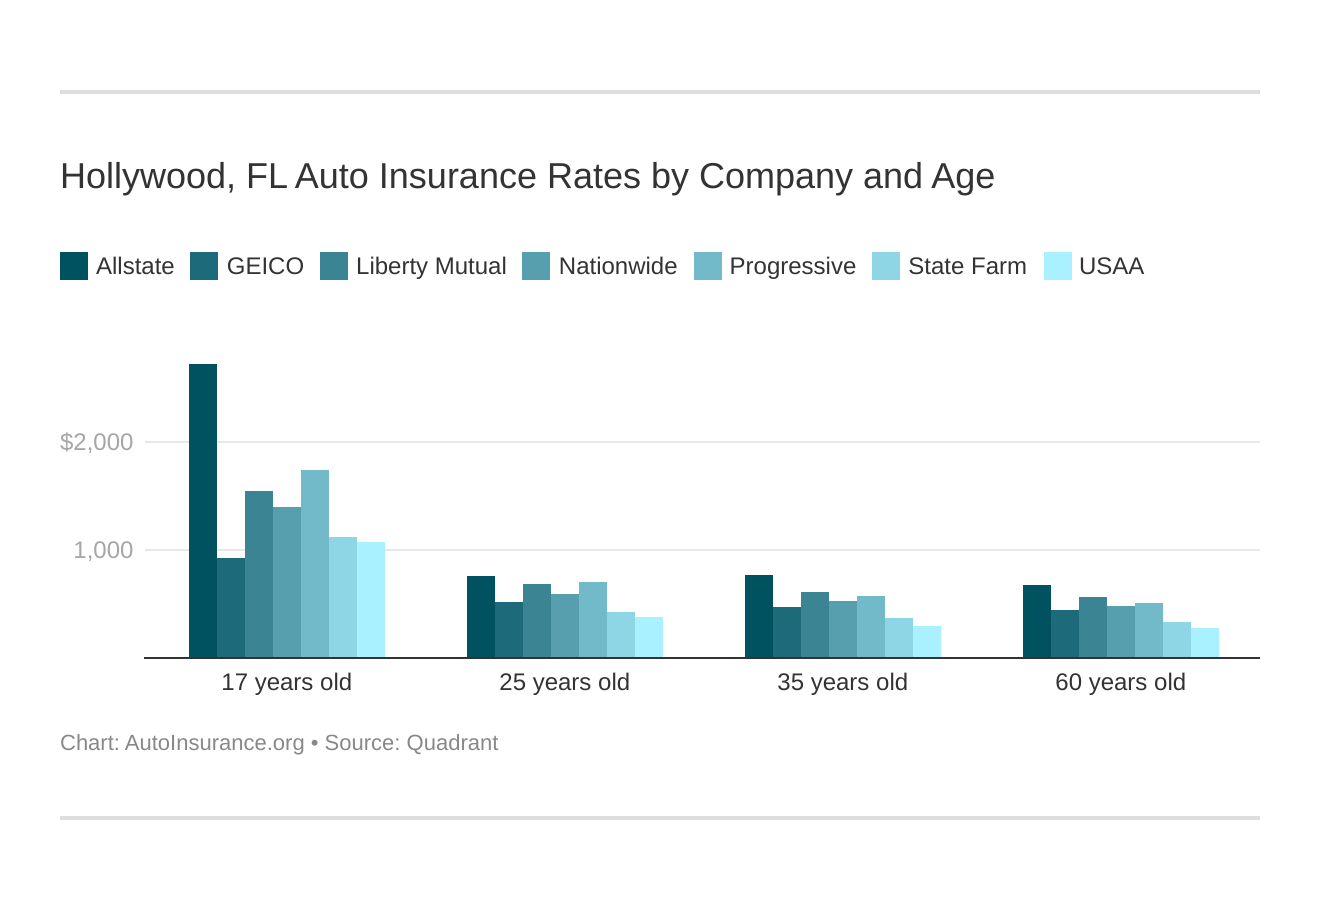 Hollywood, FL Auto Insurance Rates by Company and Age